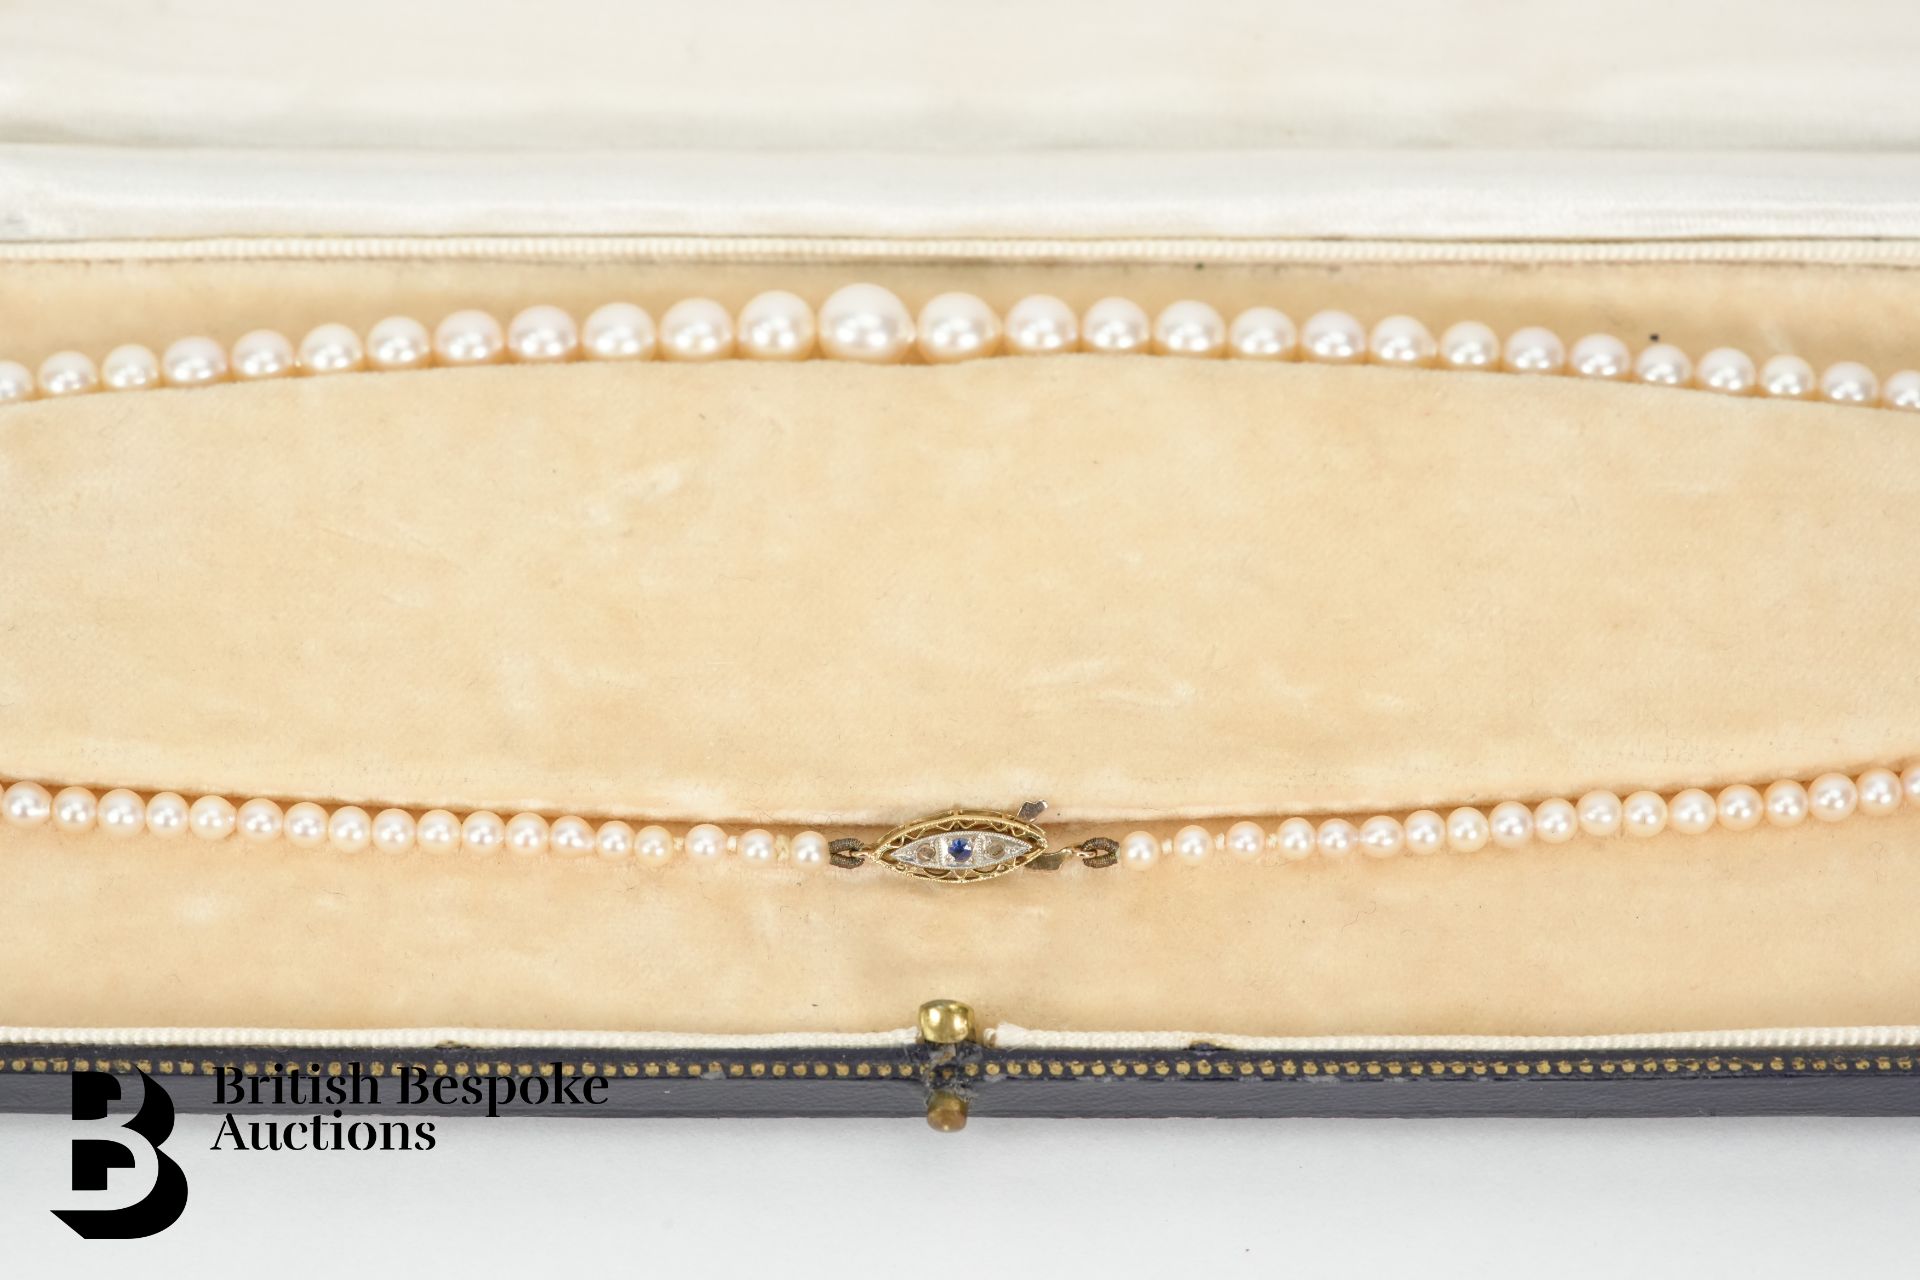 Antique Single Strand of Pearls - Image 3 of 7